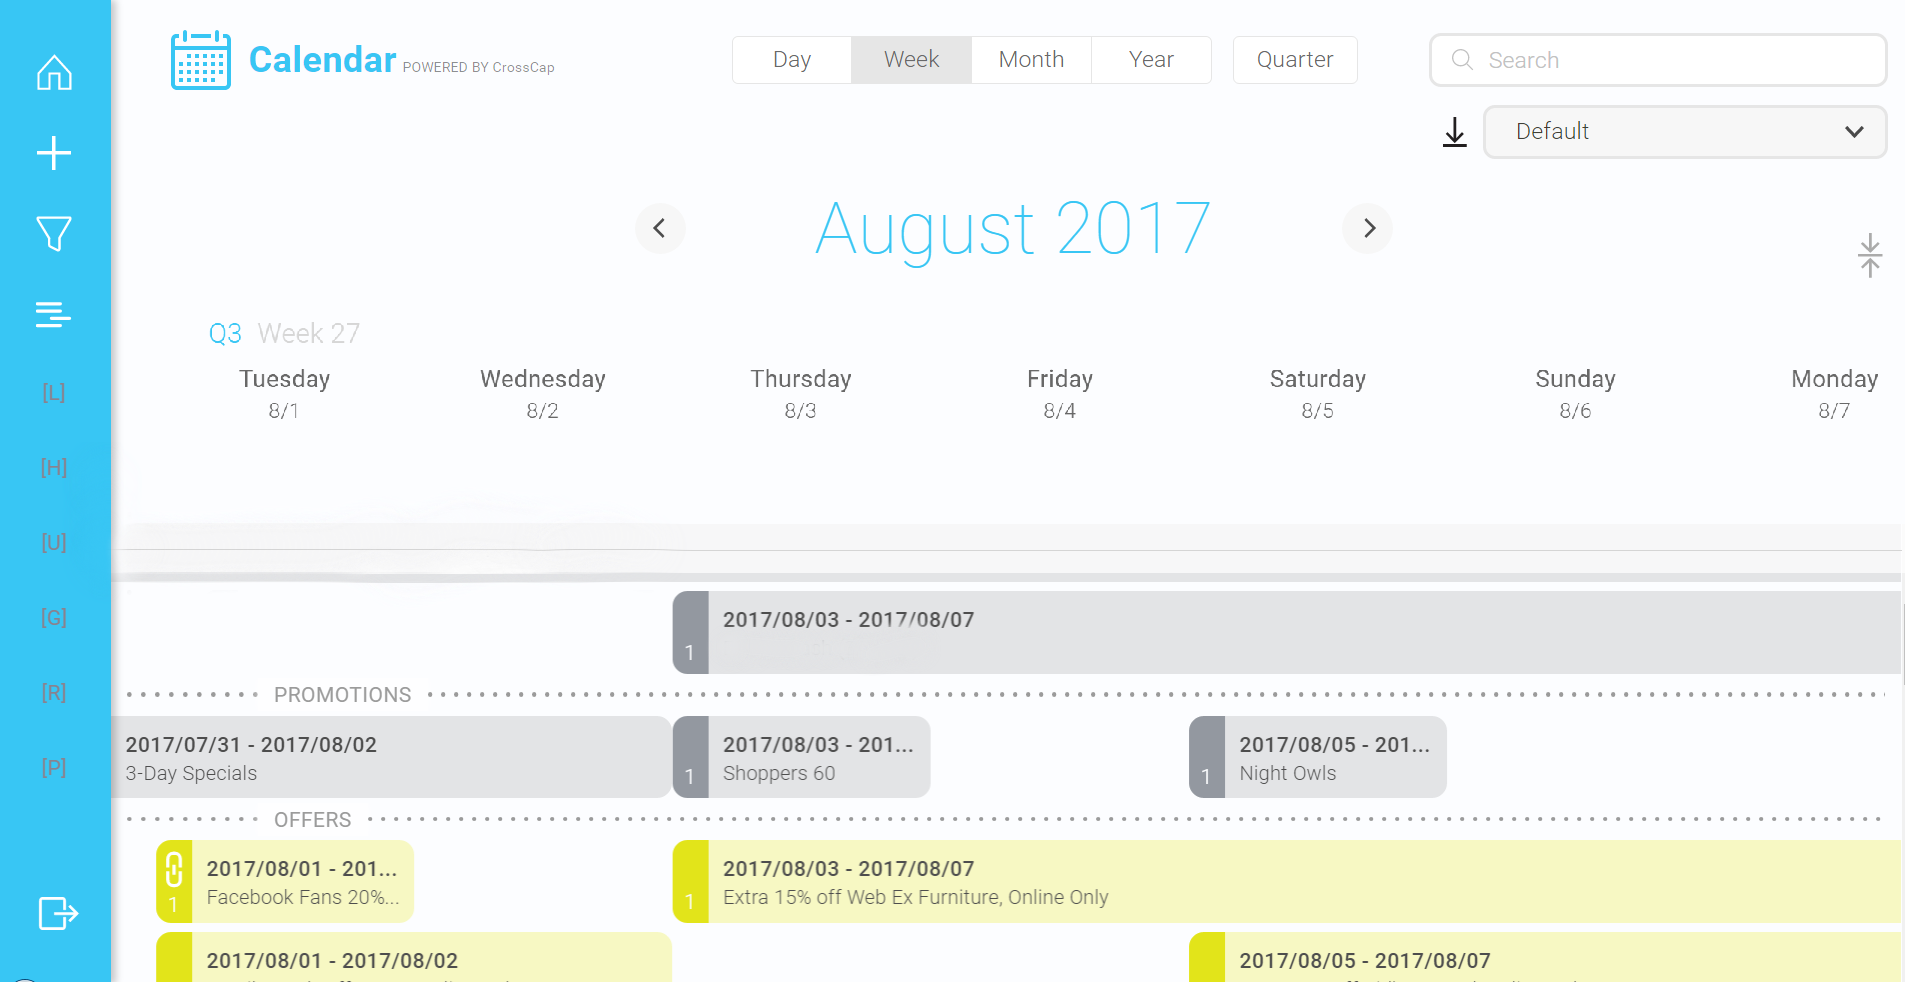 How to make an educated buying decision regarding purchasing a marketing calendar software